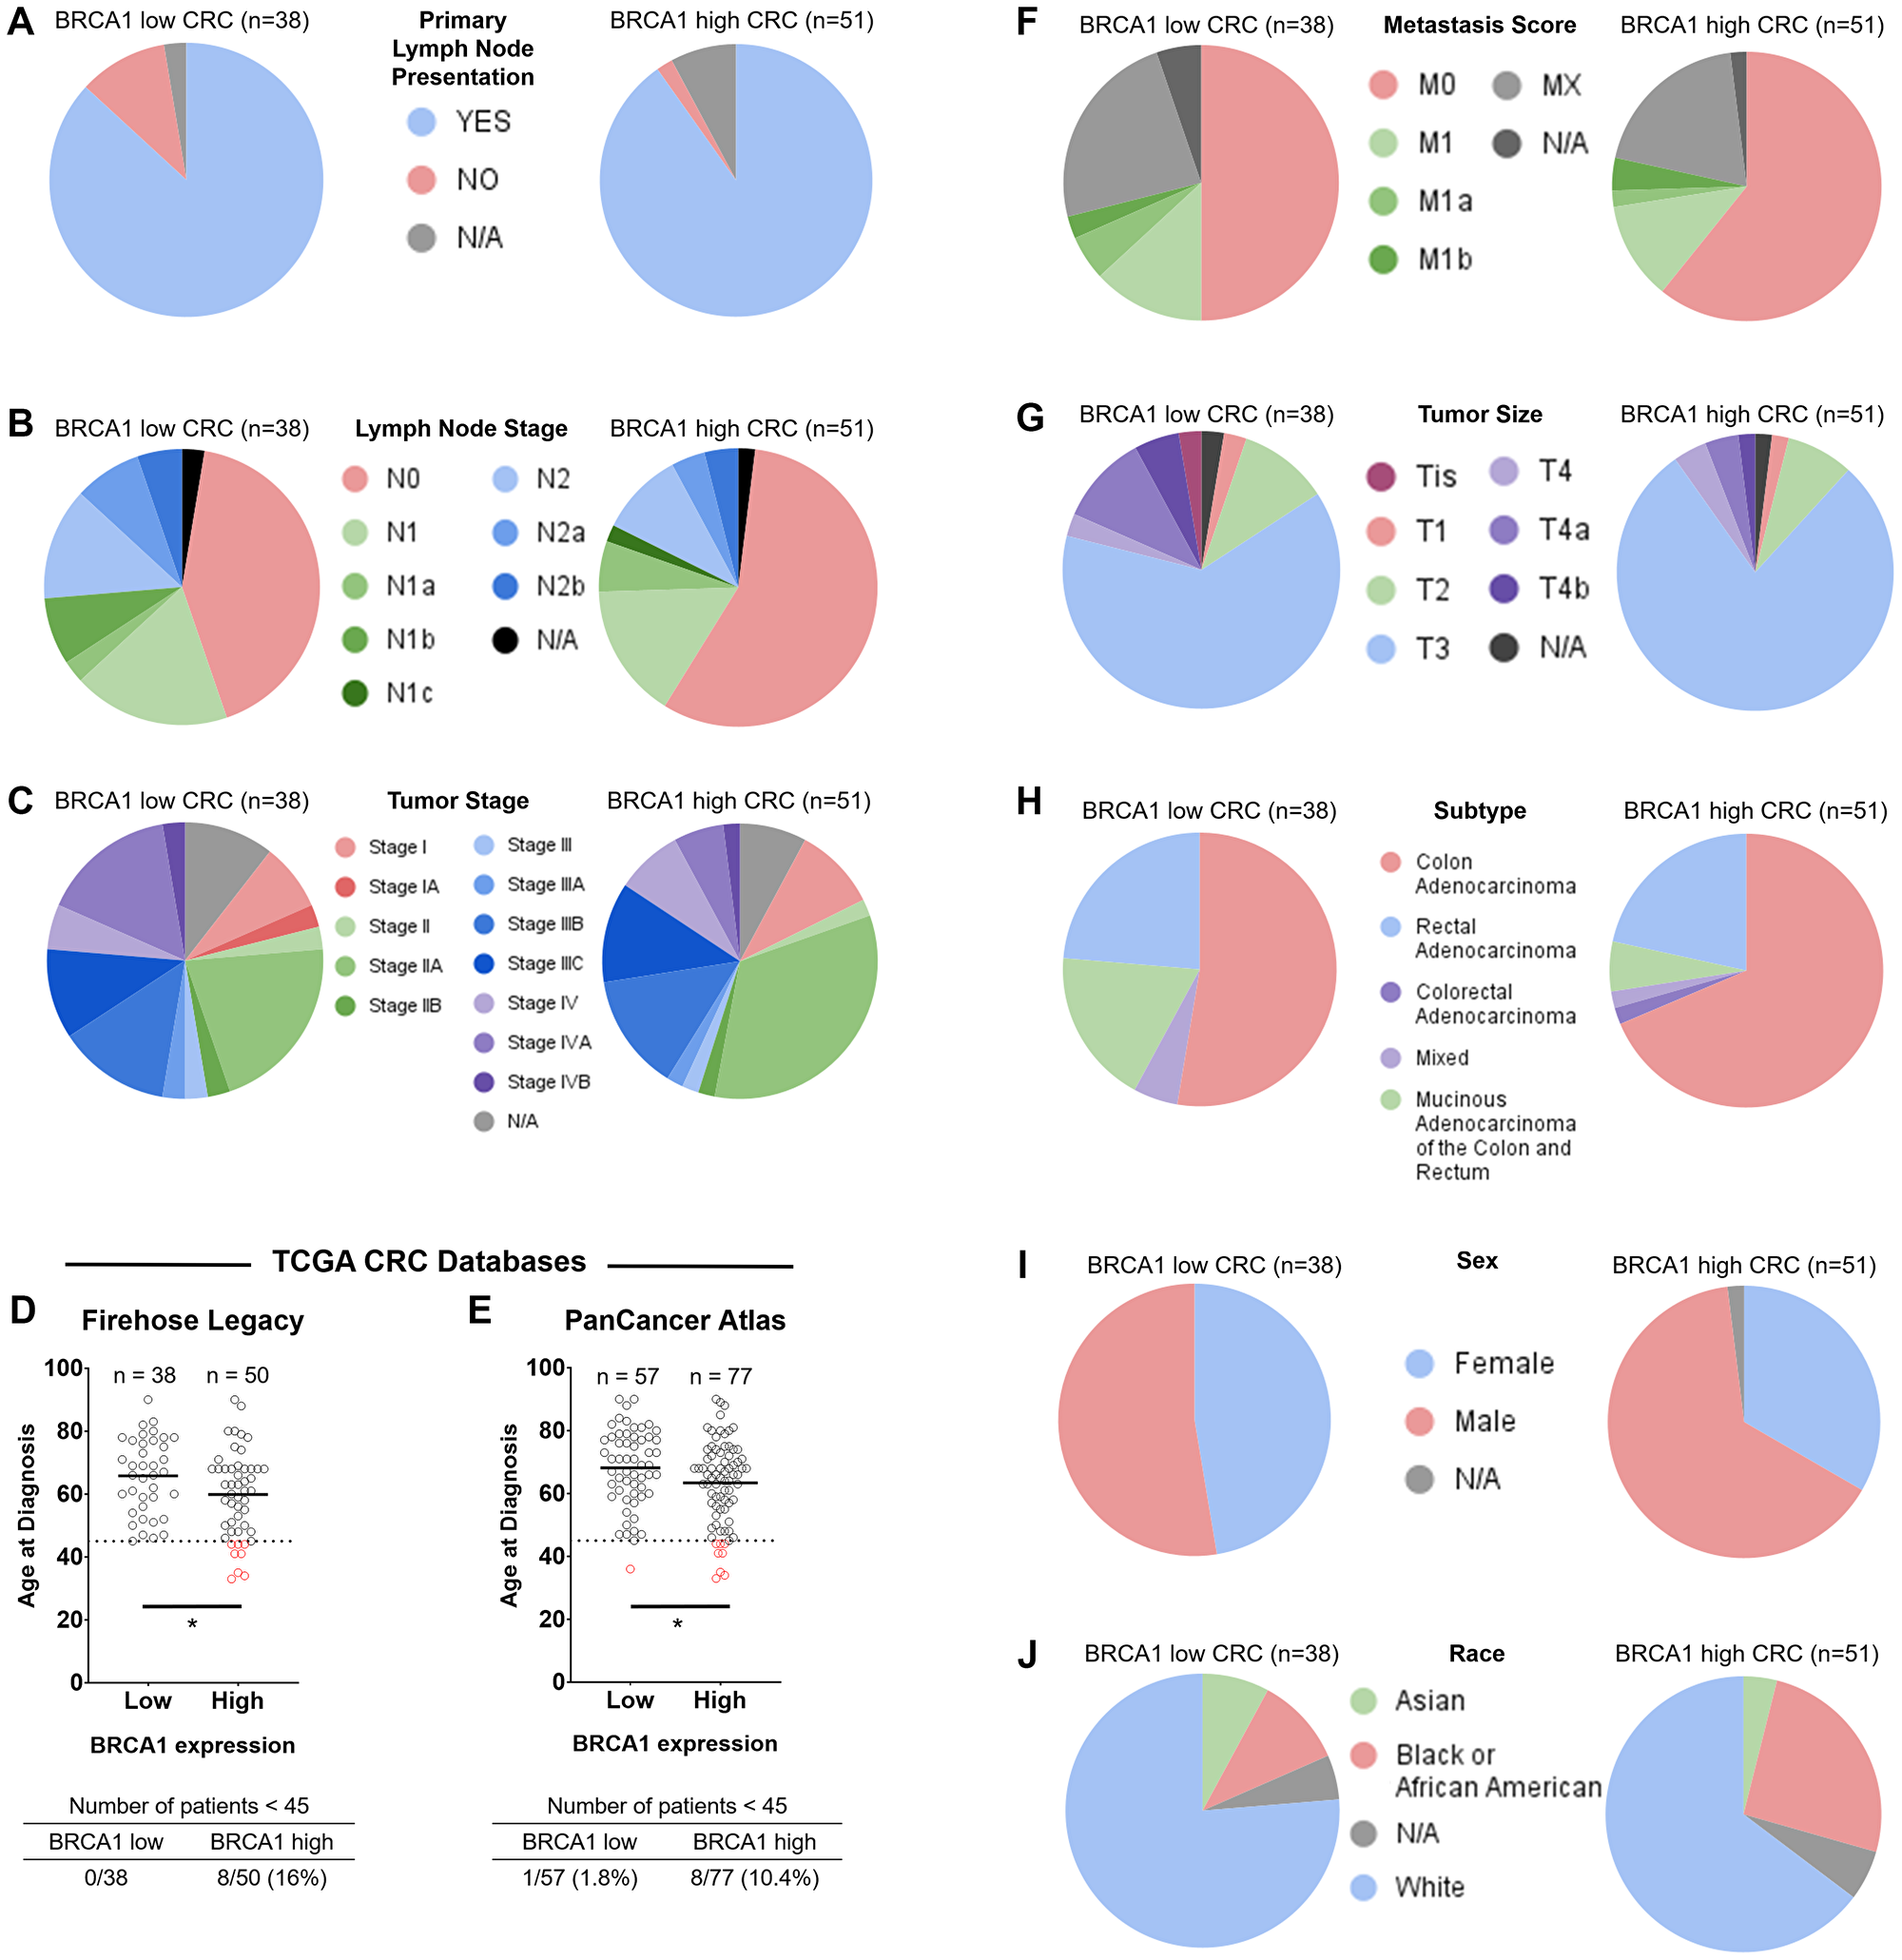 Distribution of primary lymph node presentation, lymph node stage, tumor stage, age, metastasis score, tumor size, specific cancer type, sex, and race across BRCA1 mRNA-low versus -high groups in colorectal cancer.